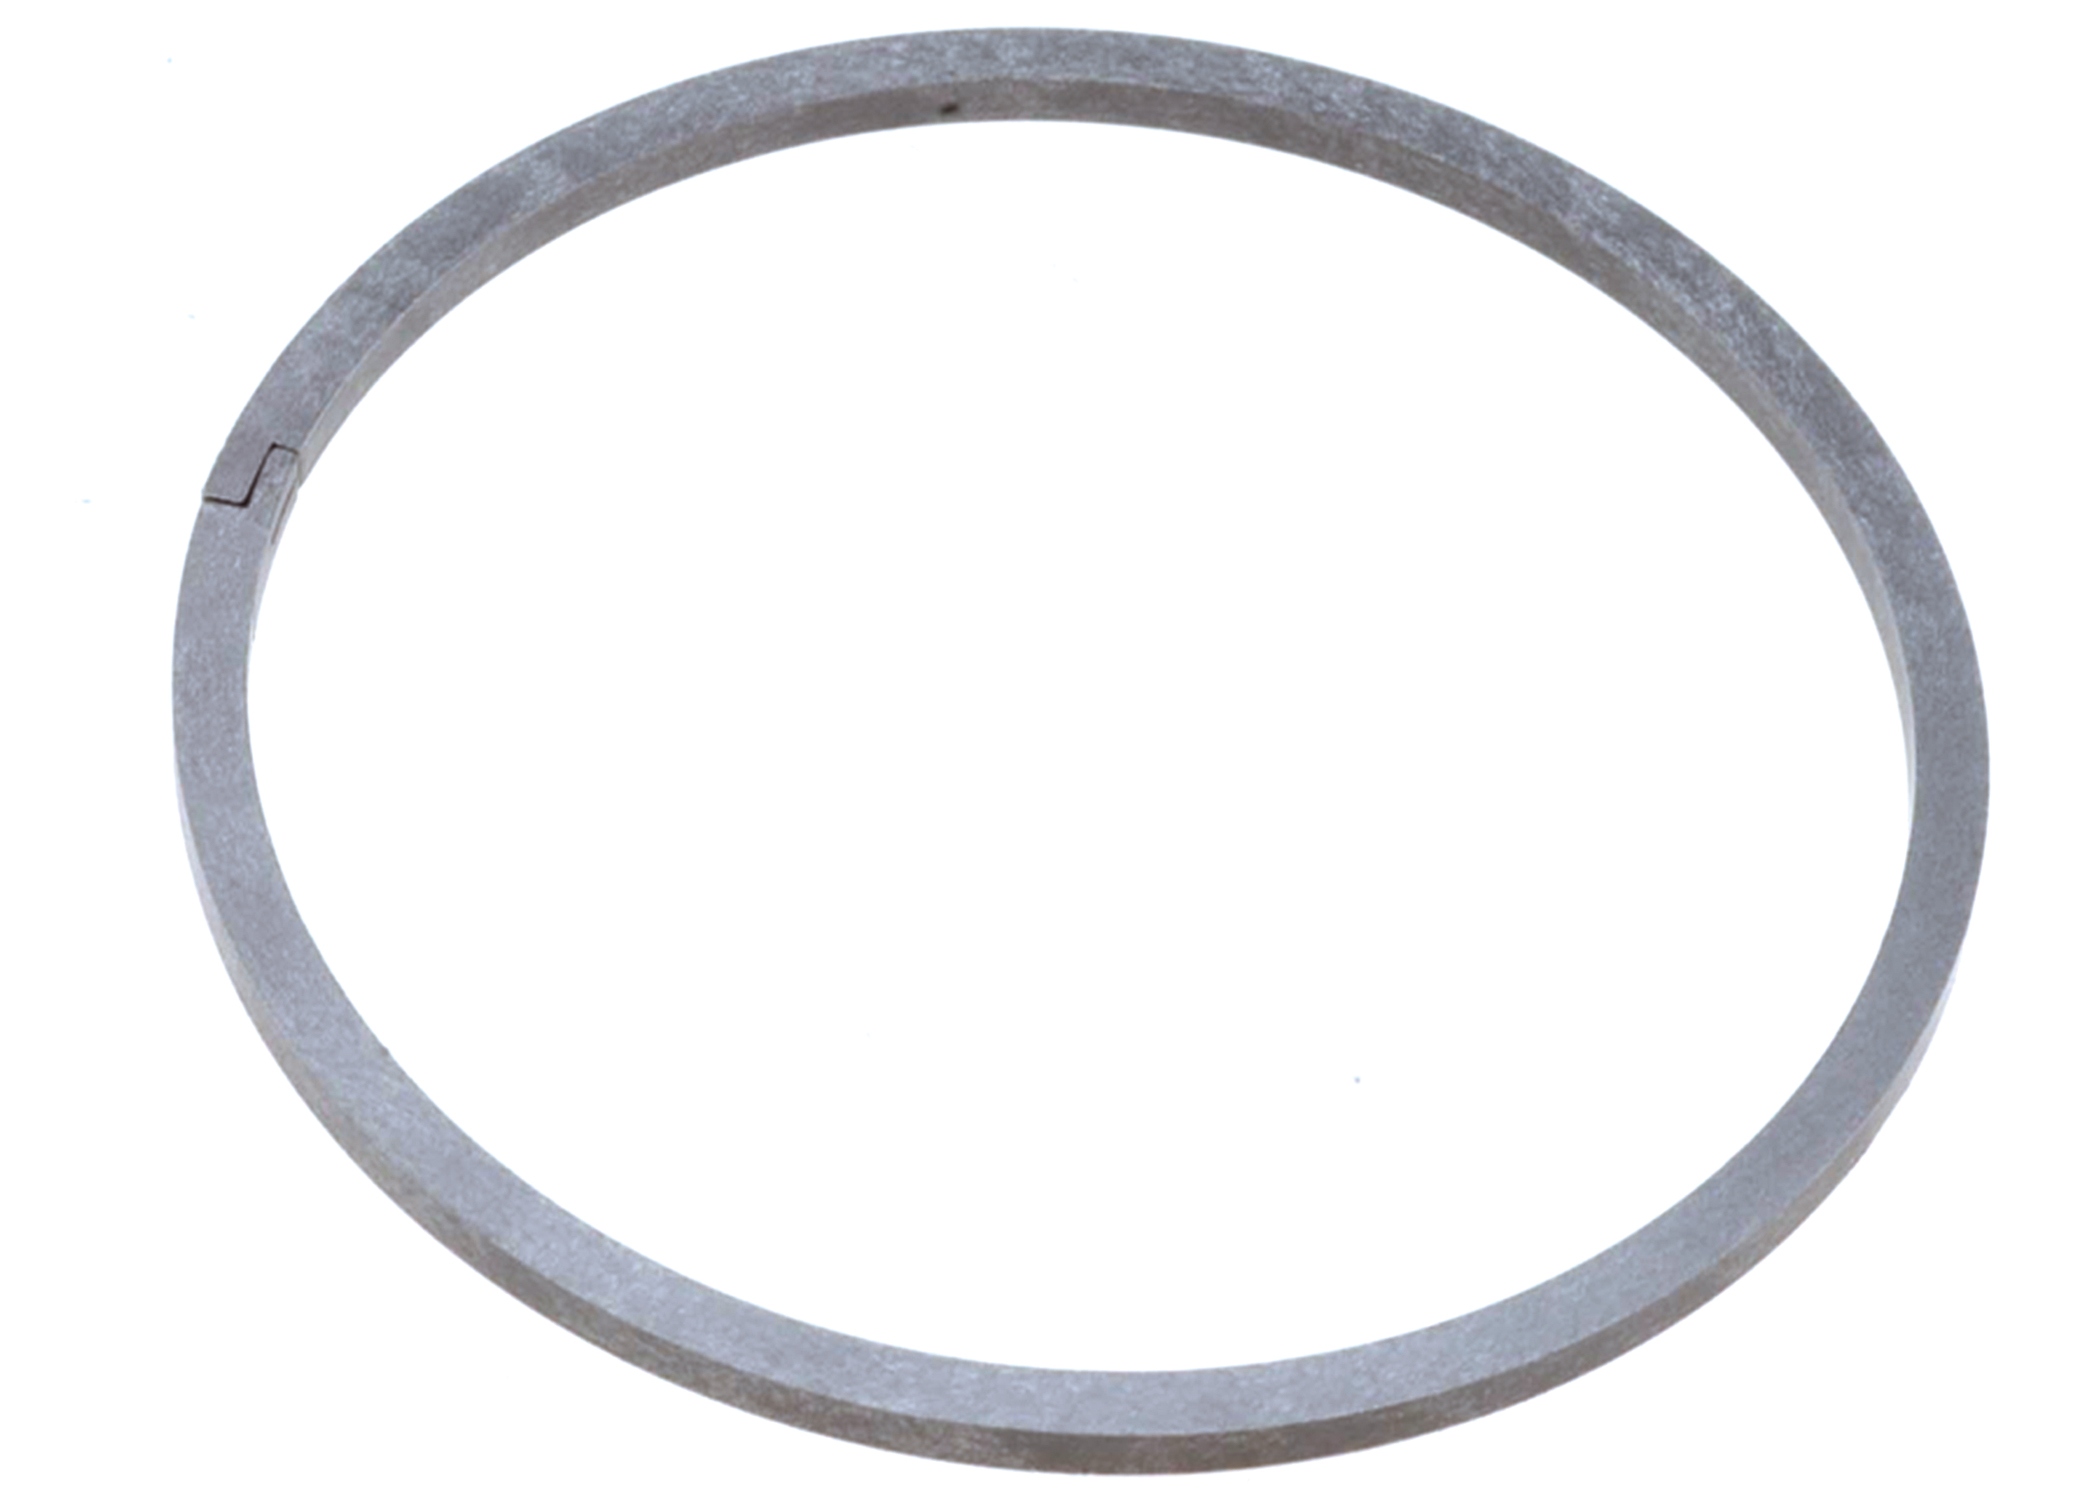 GM GENUINE PARTS - Automatic Transmission Clutch Housing Fluid Seal Ring - GMP 24205833